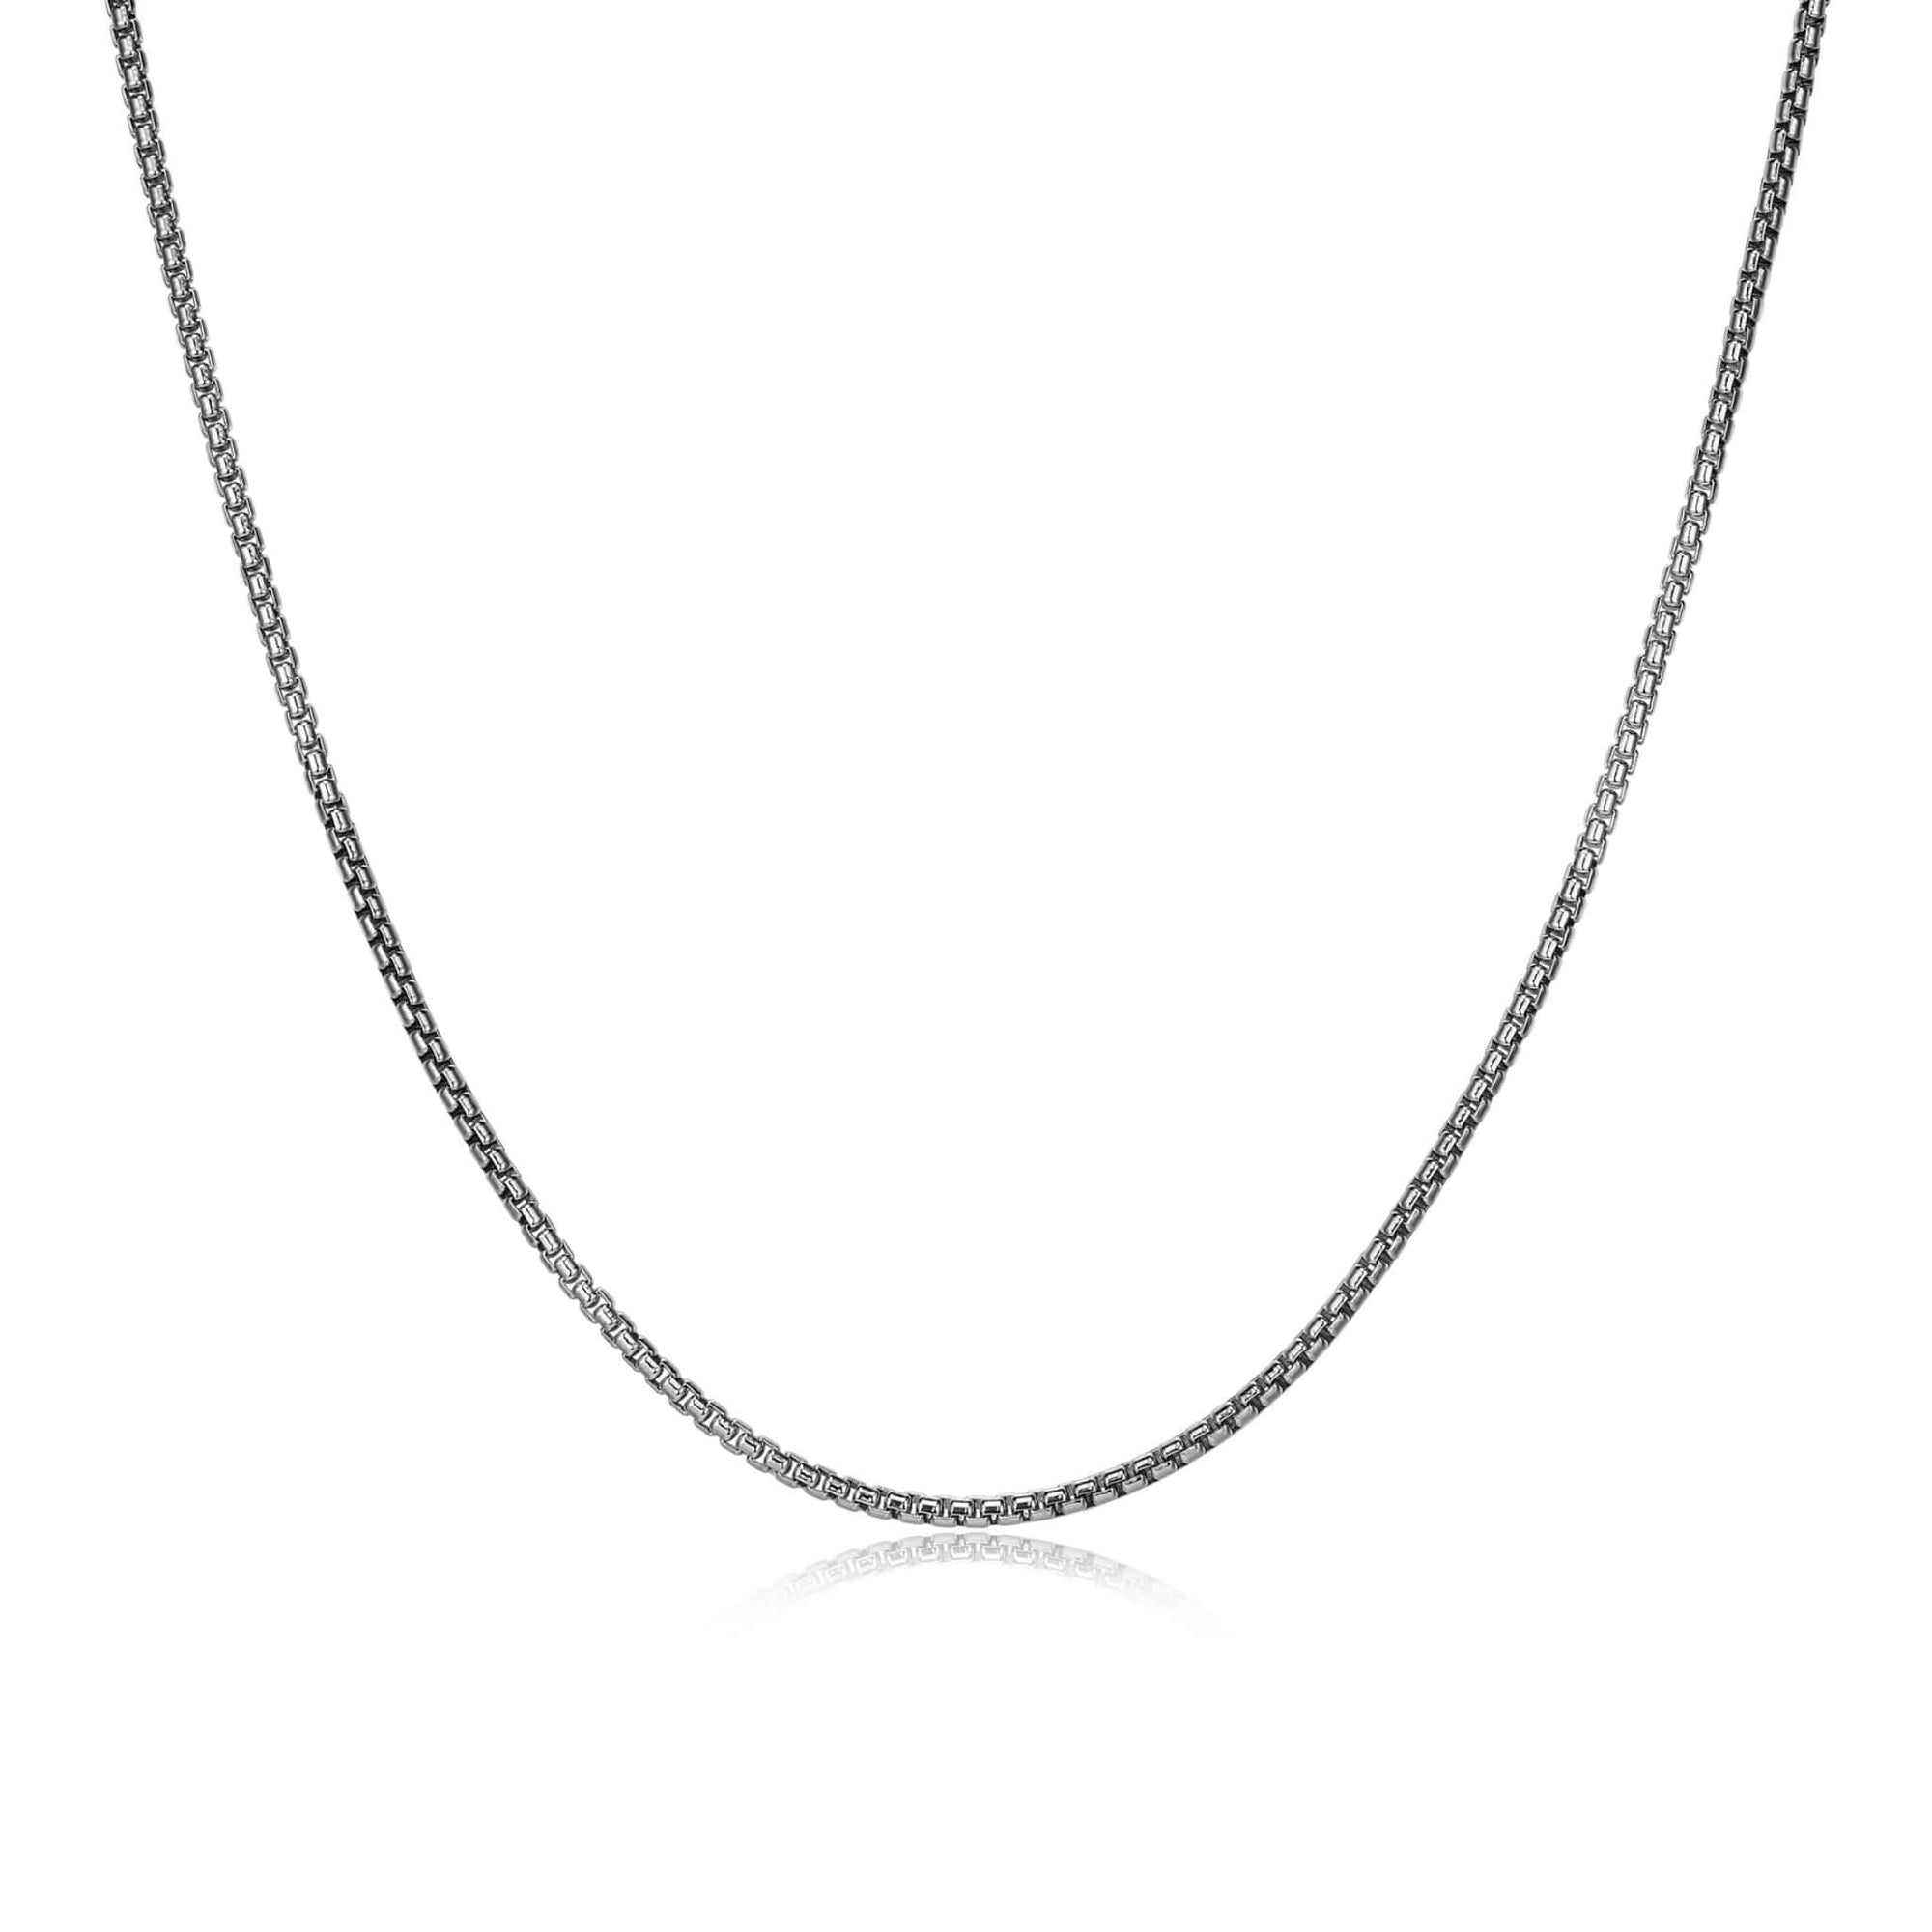 ETHOS Silver Round Box Chain Necklace at Arman's Jewellers Kitchener